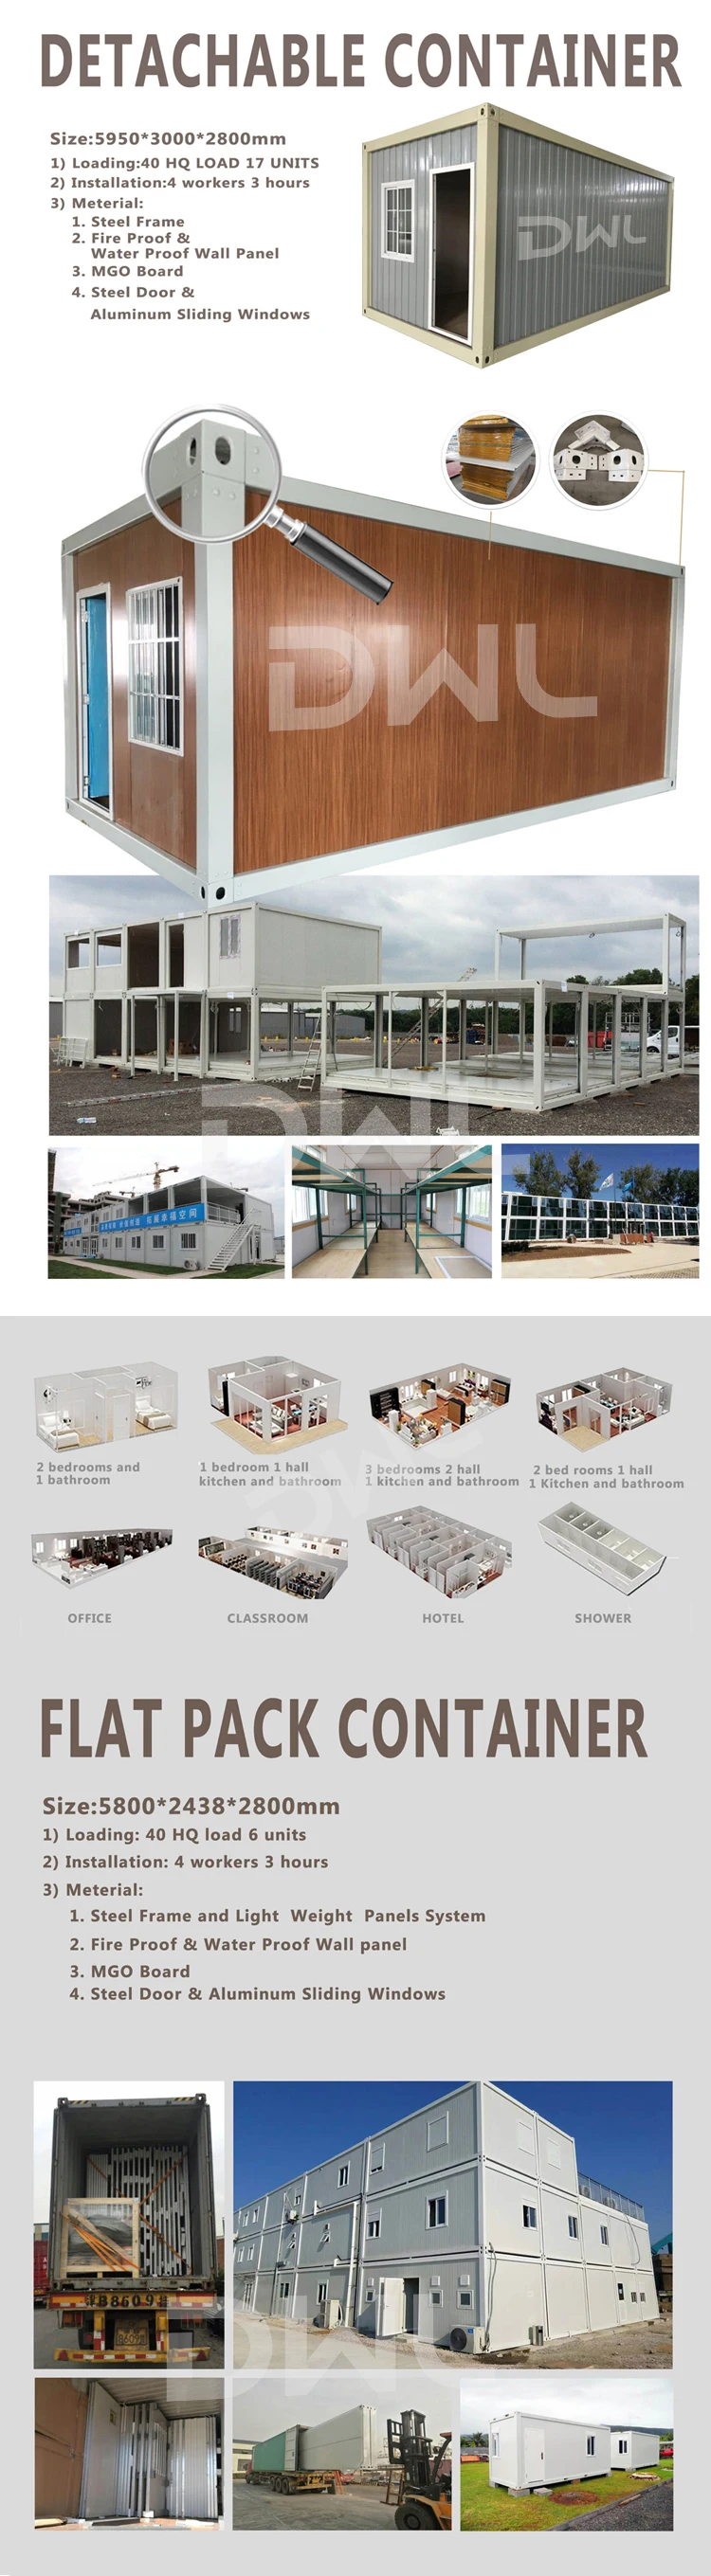 prefabricated container coffee shop.jpg